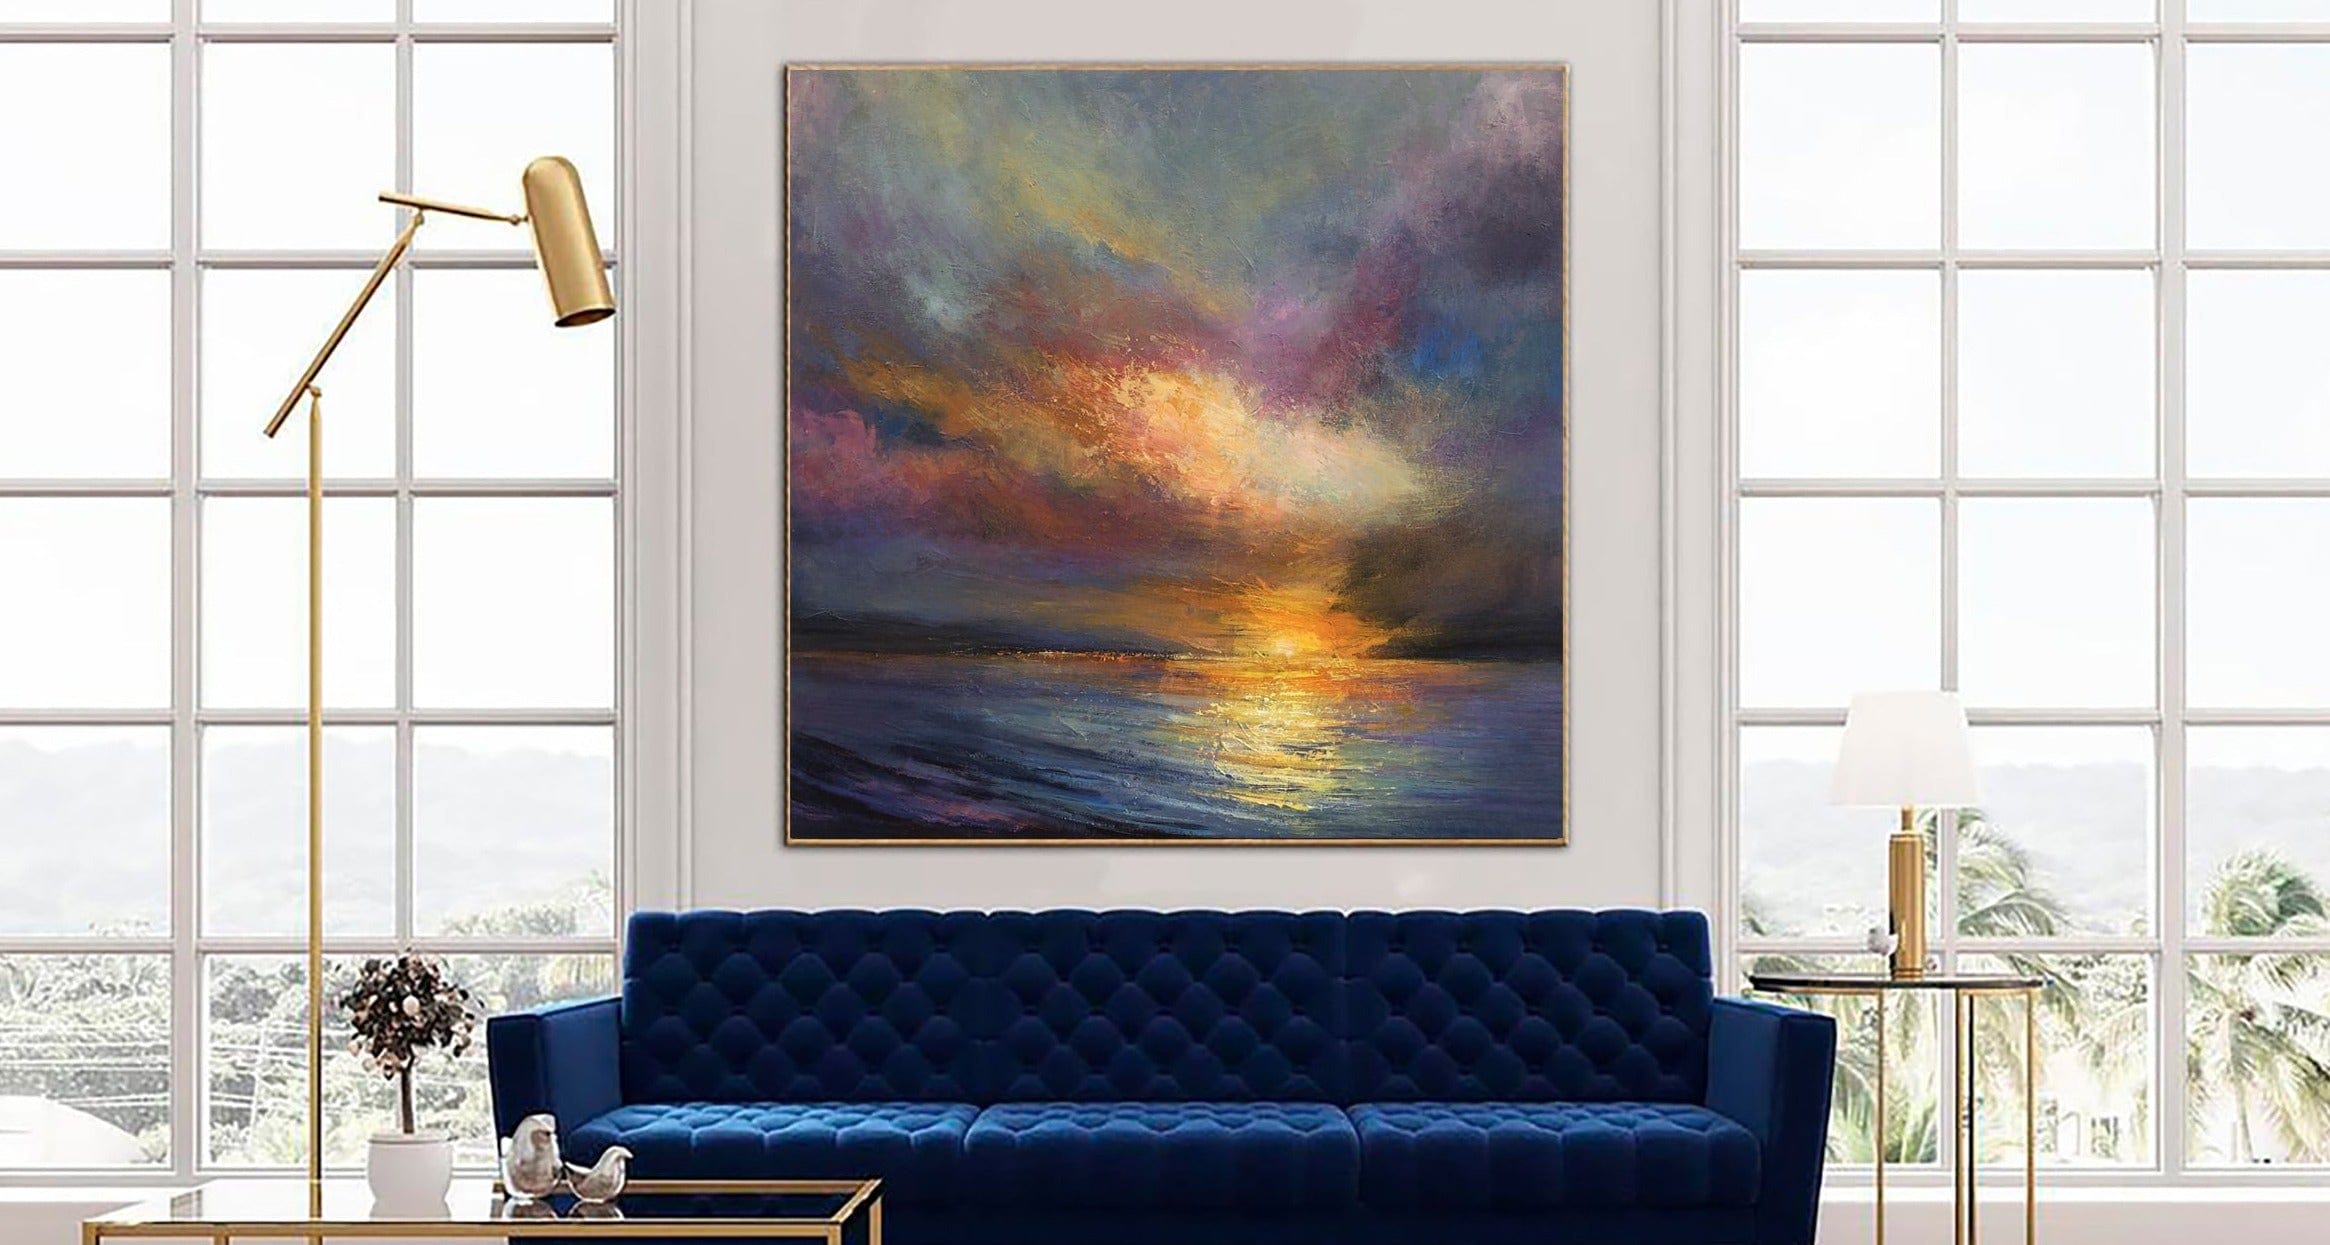 SUNSET OVER THE OCEAN from $304